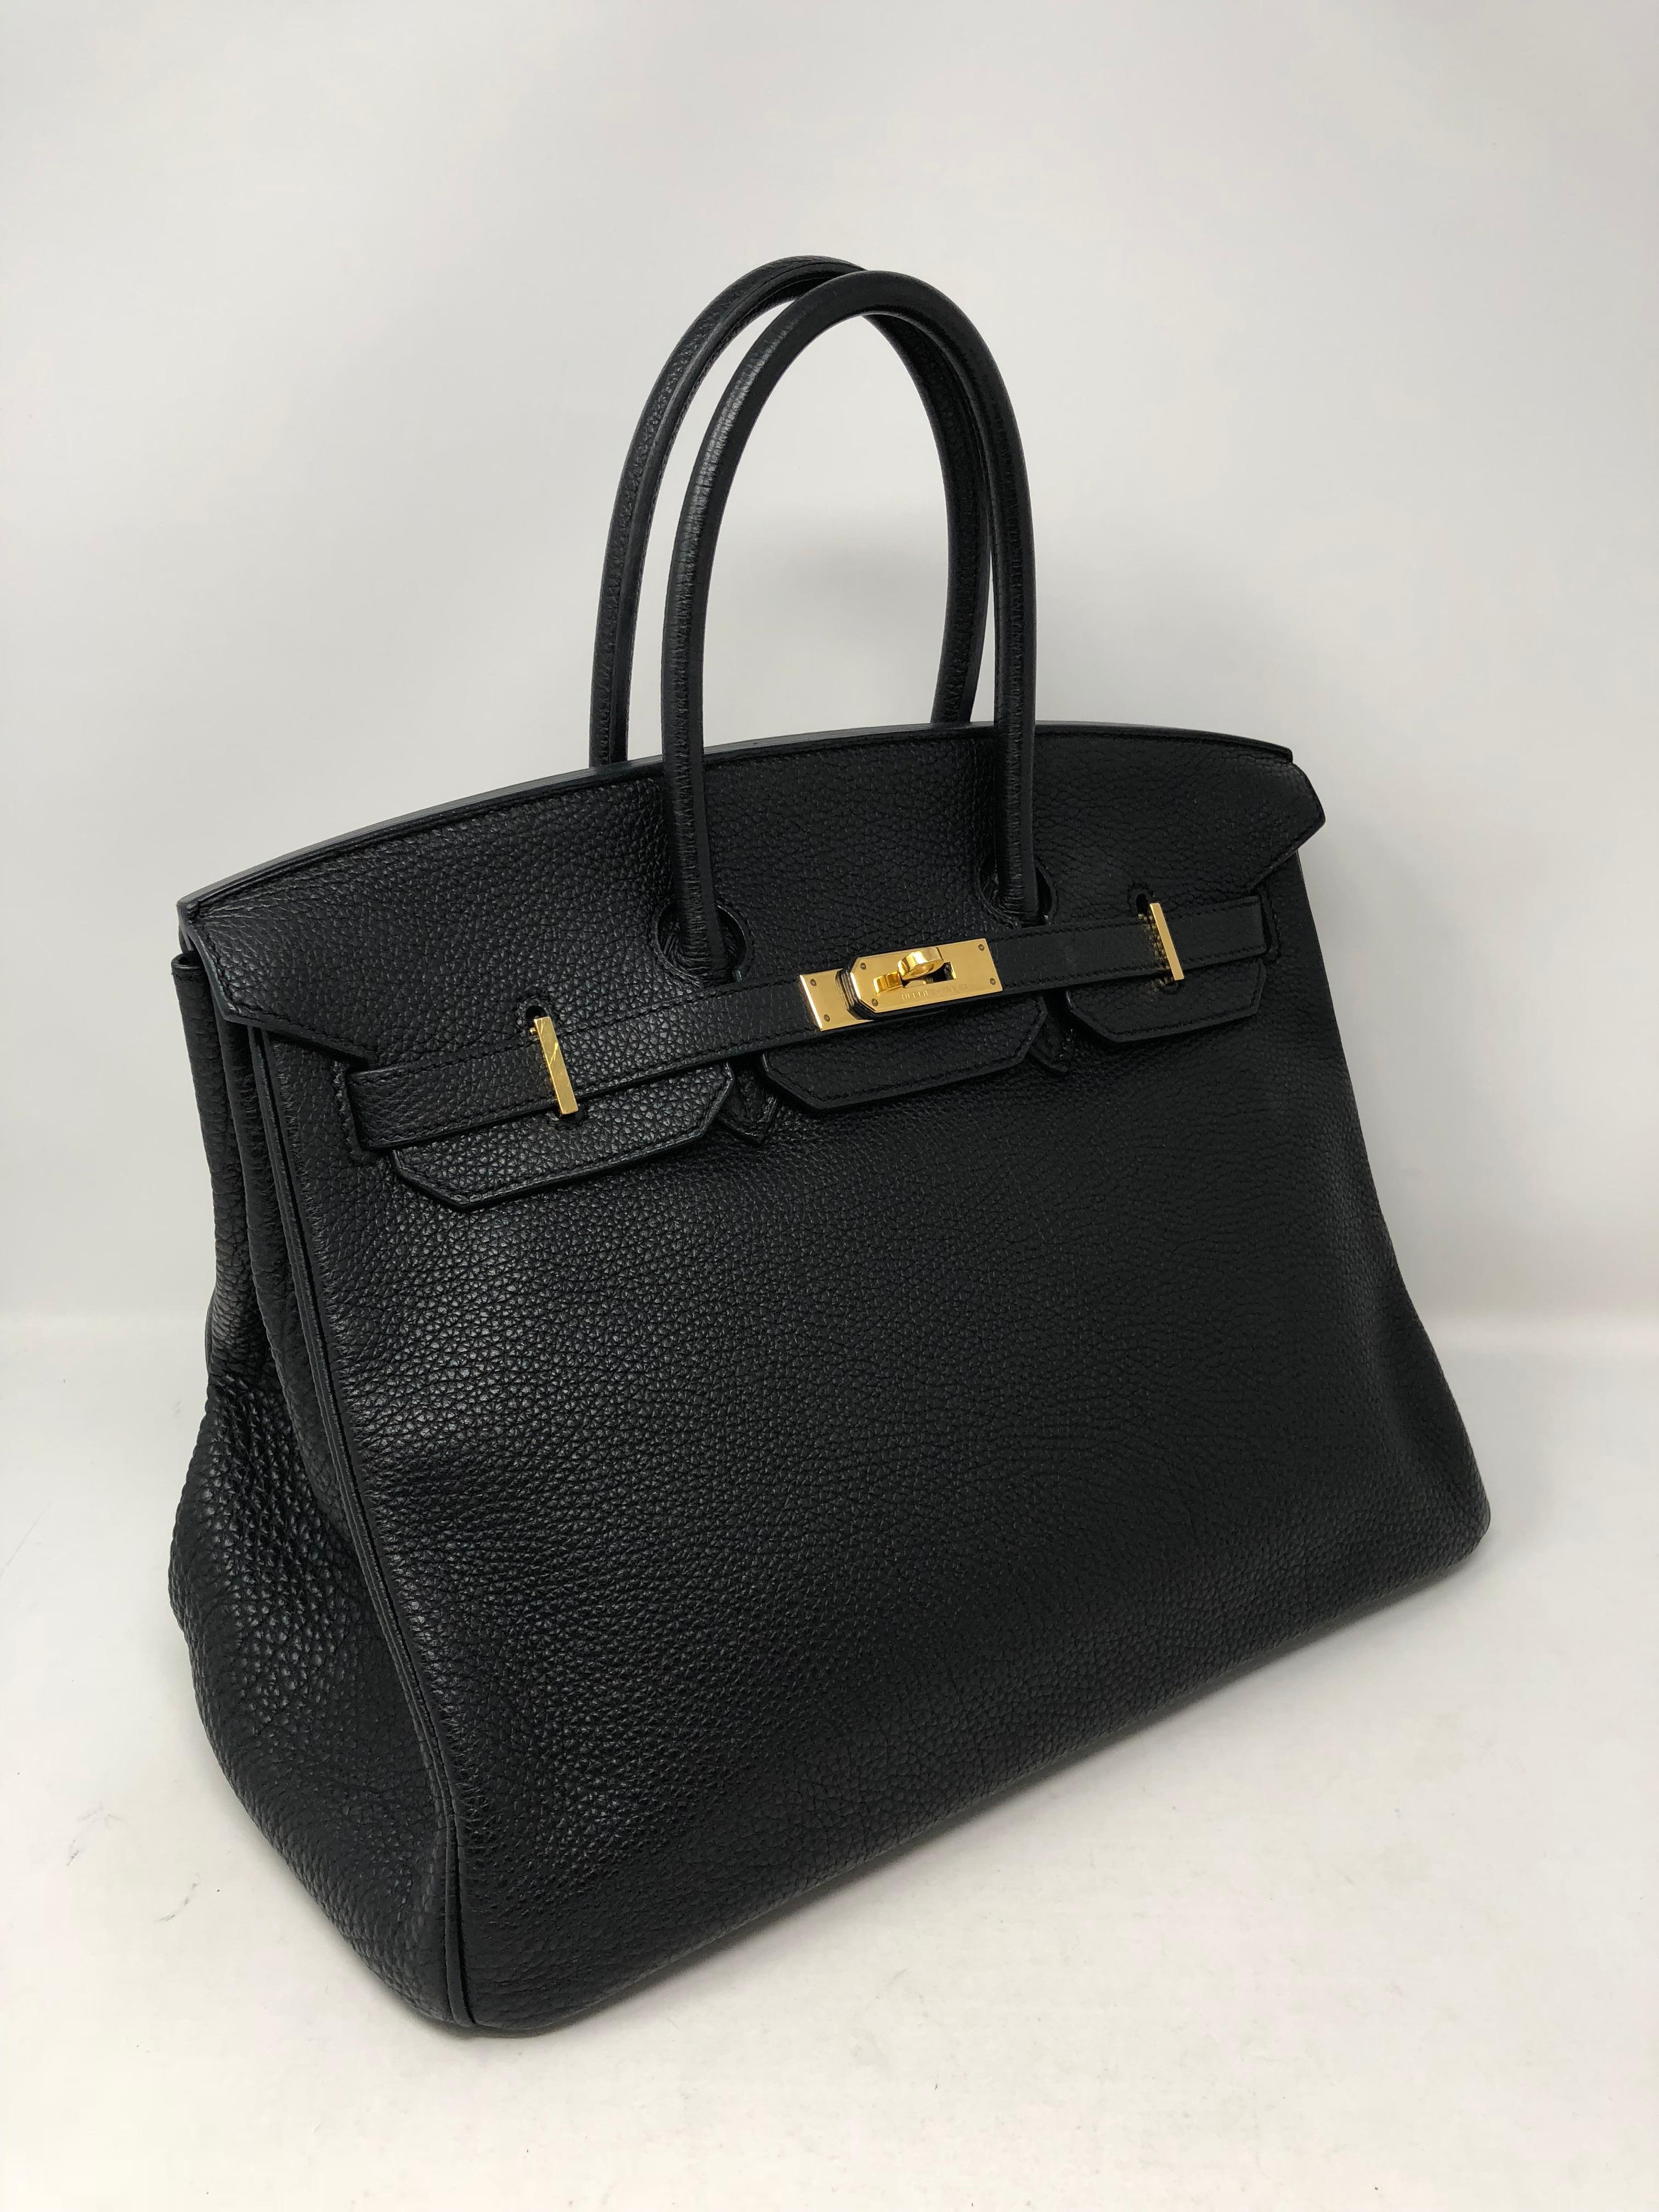 Hermes Black Birkin 35 togo leather with gold hardware. Beautiful bag in most wanted color. Classic size 35 in good condition. Comes with matching clochette, lock and keys. Guaranteed authentic.  